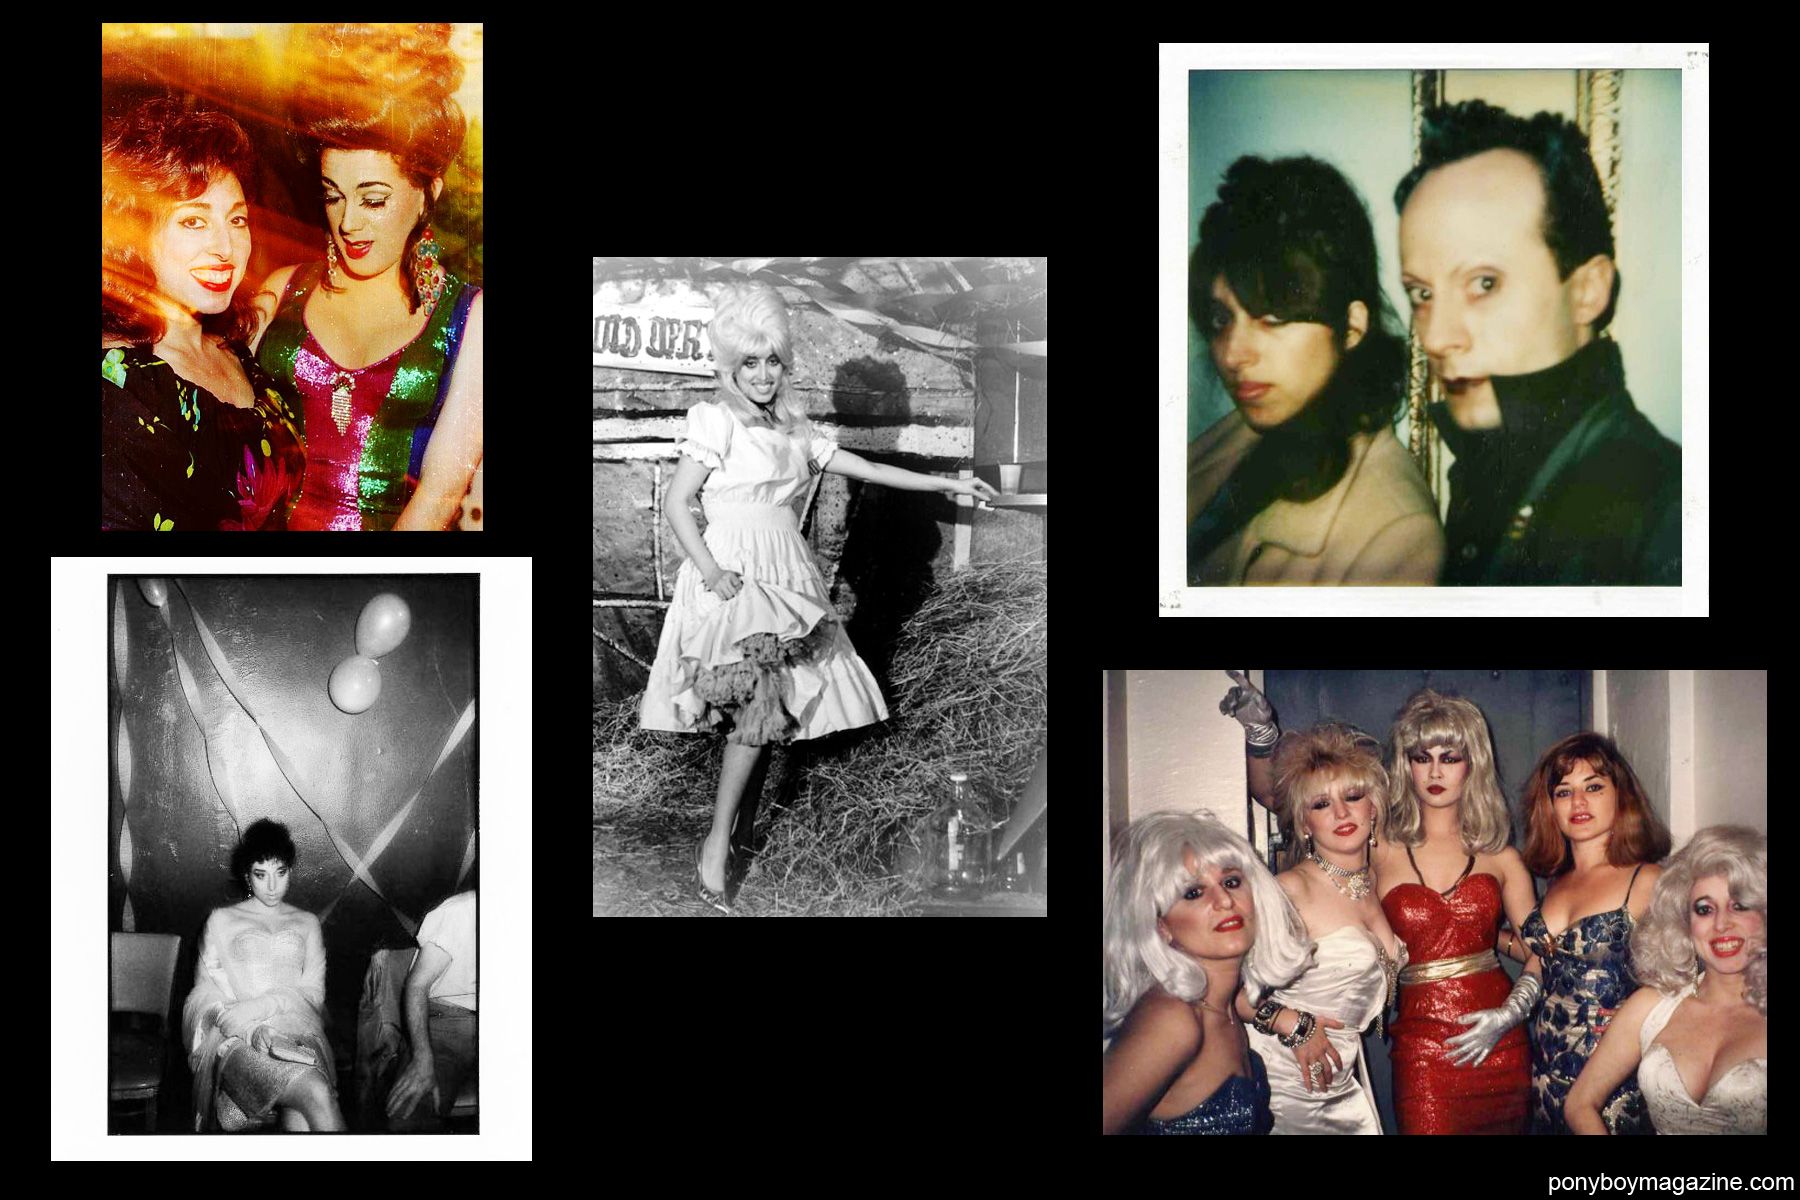 Assorted photos of Kay K and friends, including Klaus Nomi for Ponyboy Magazine.